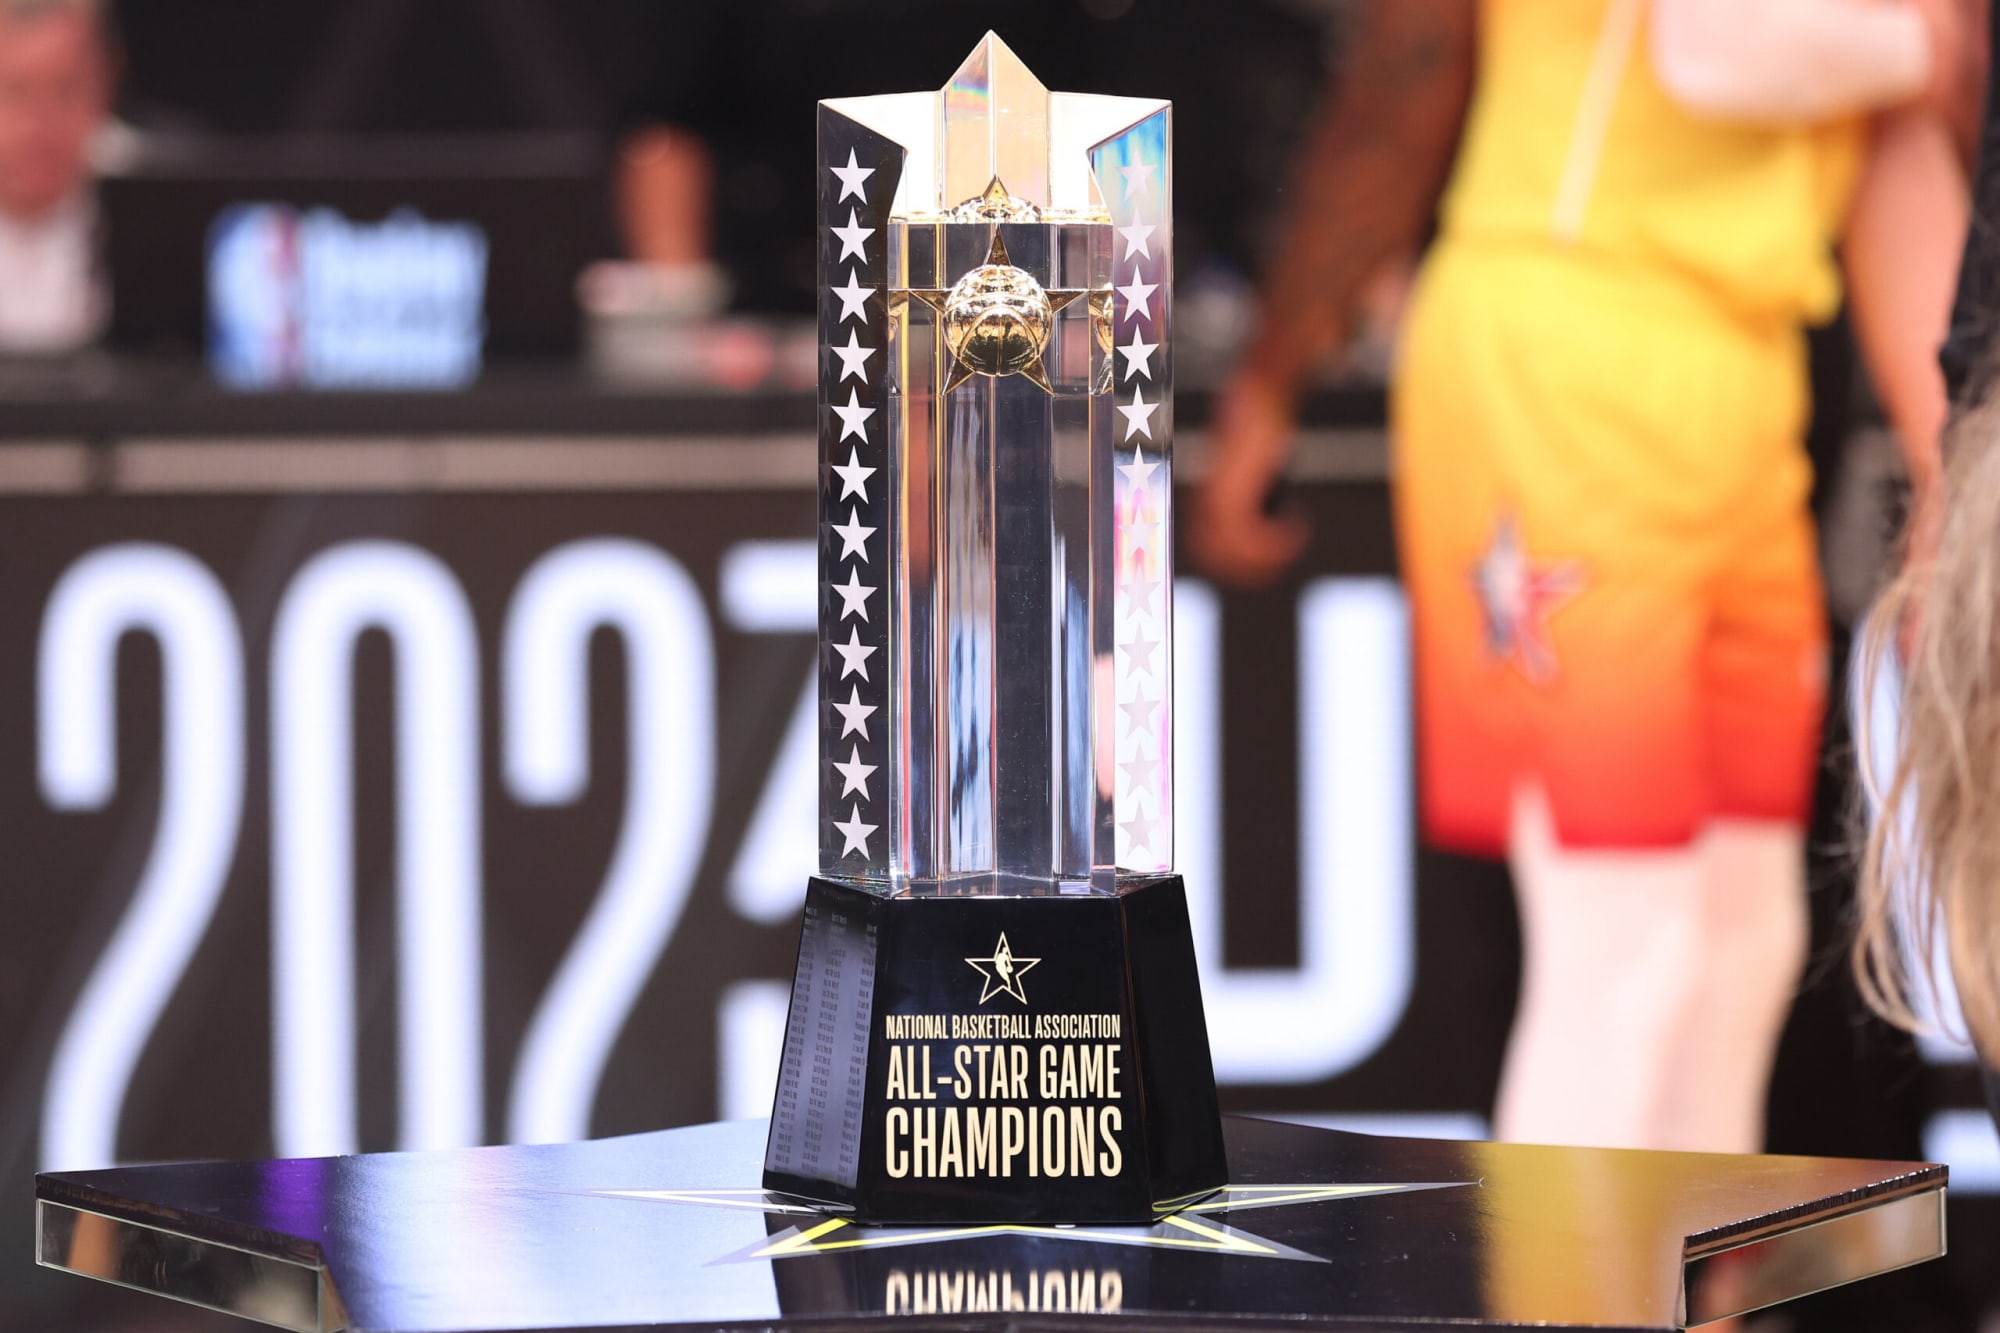 NBA All-Star Game locations: 2023, 2024 and beyond